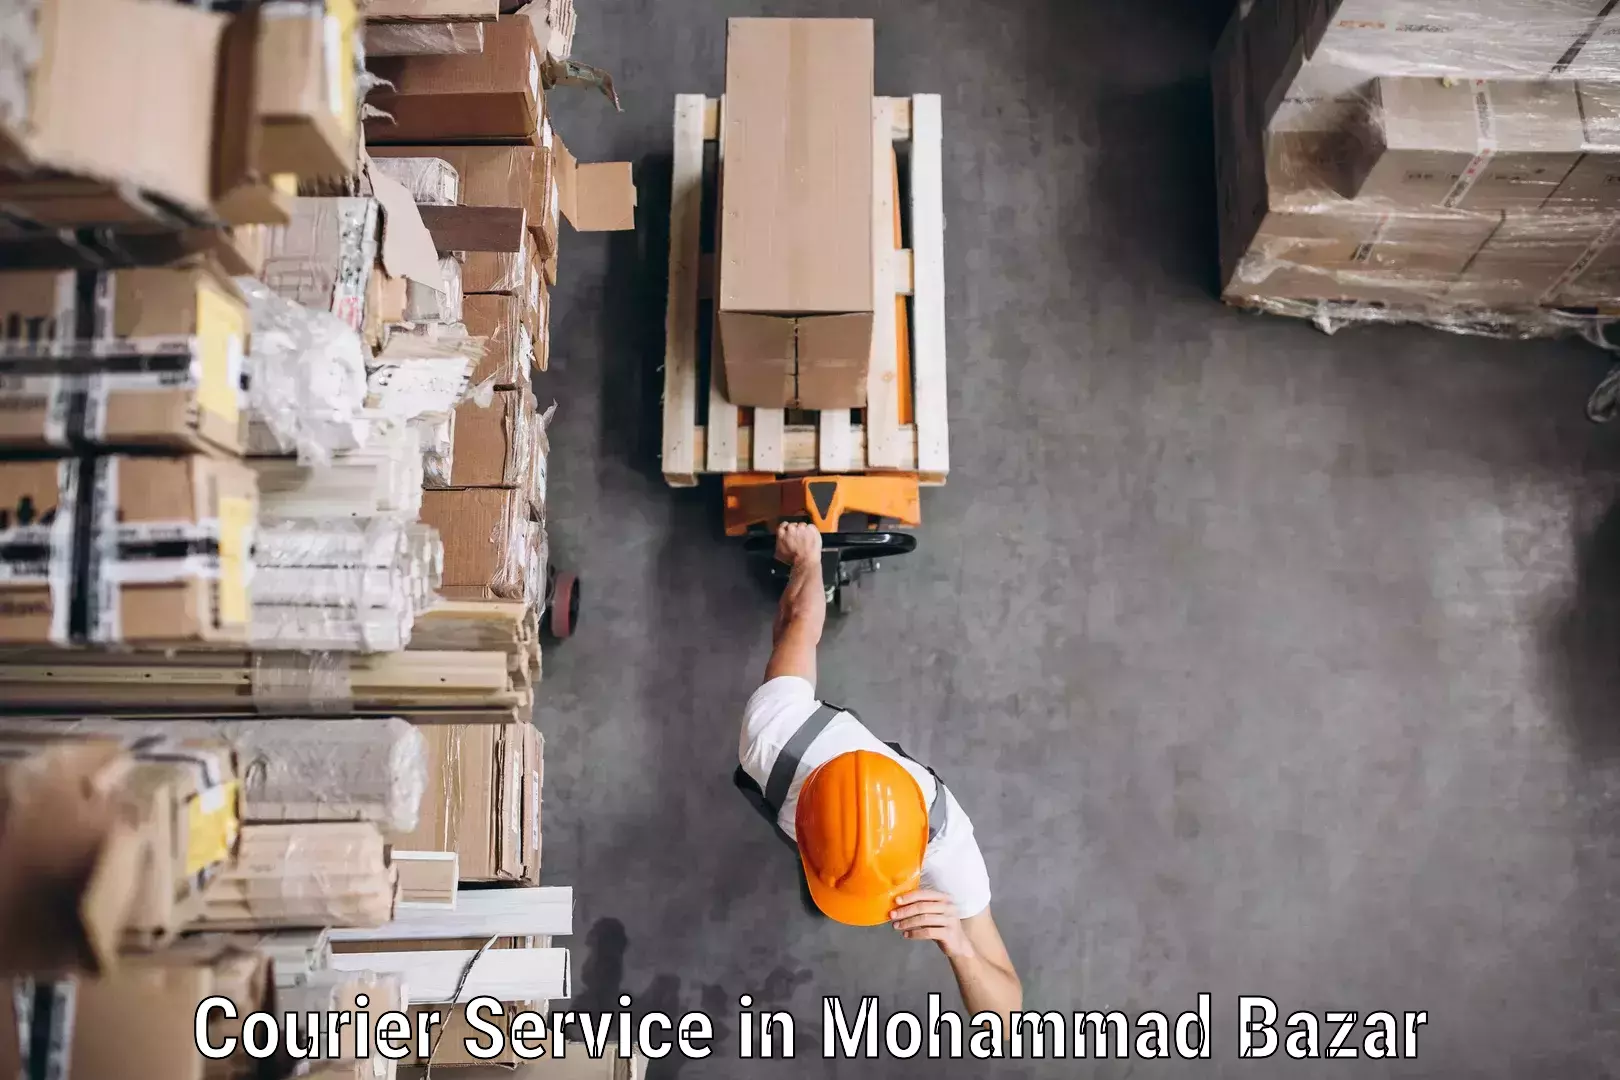 Reliable courier service in Mohammad Bazar